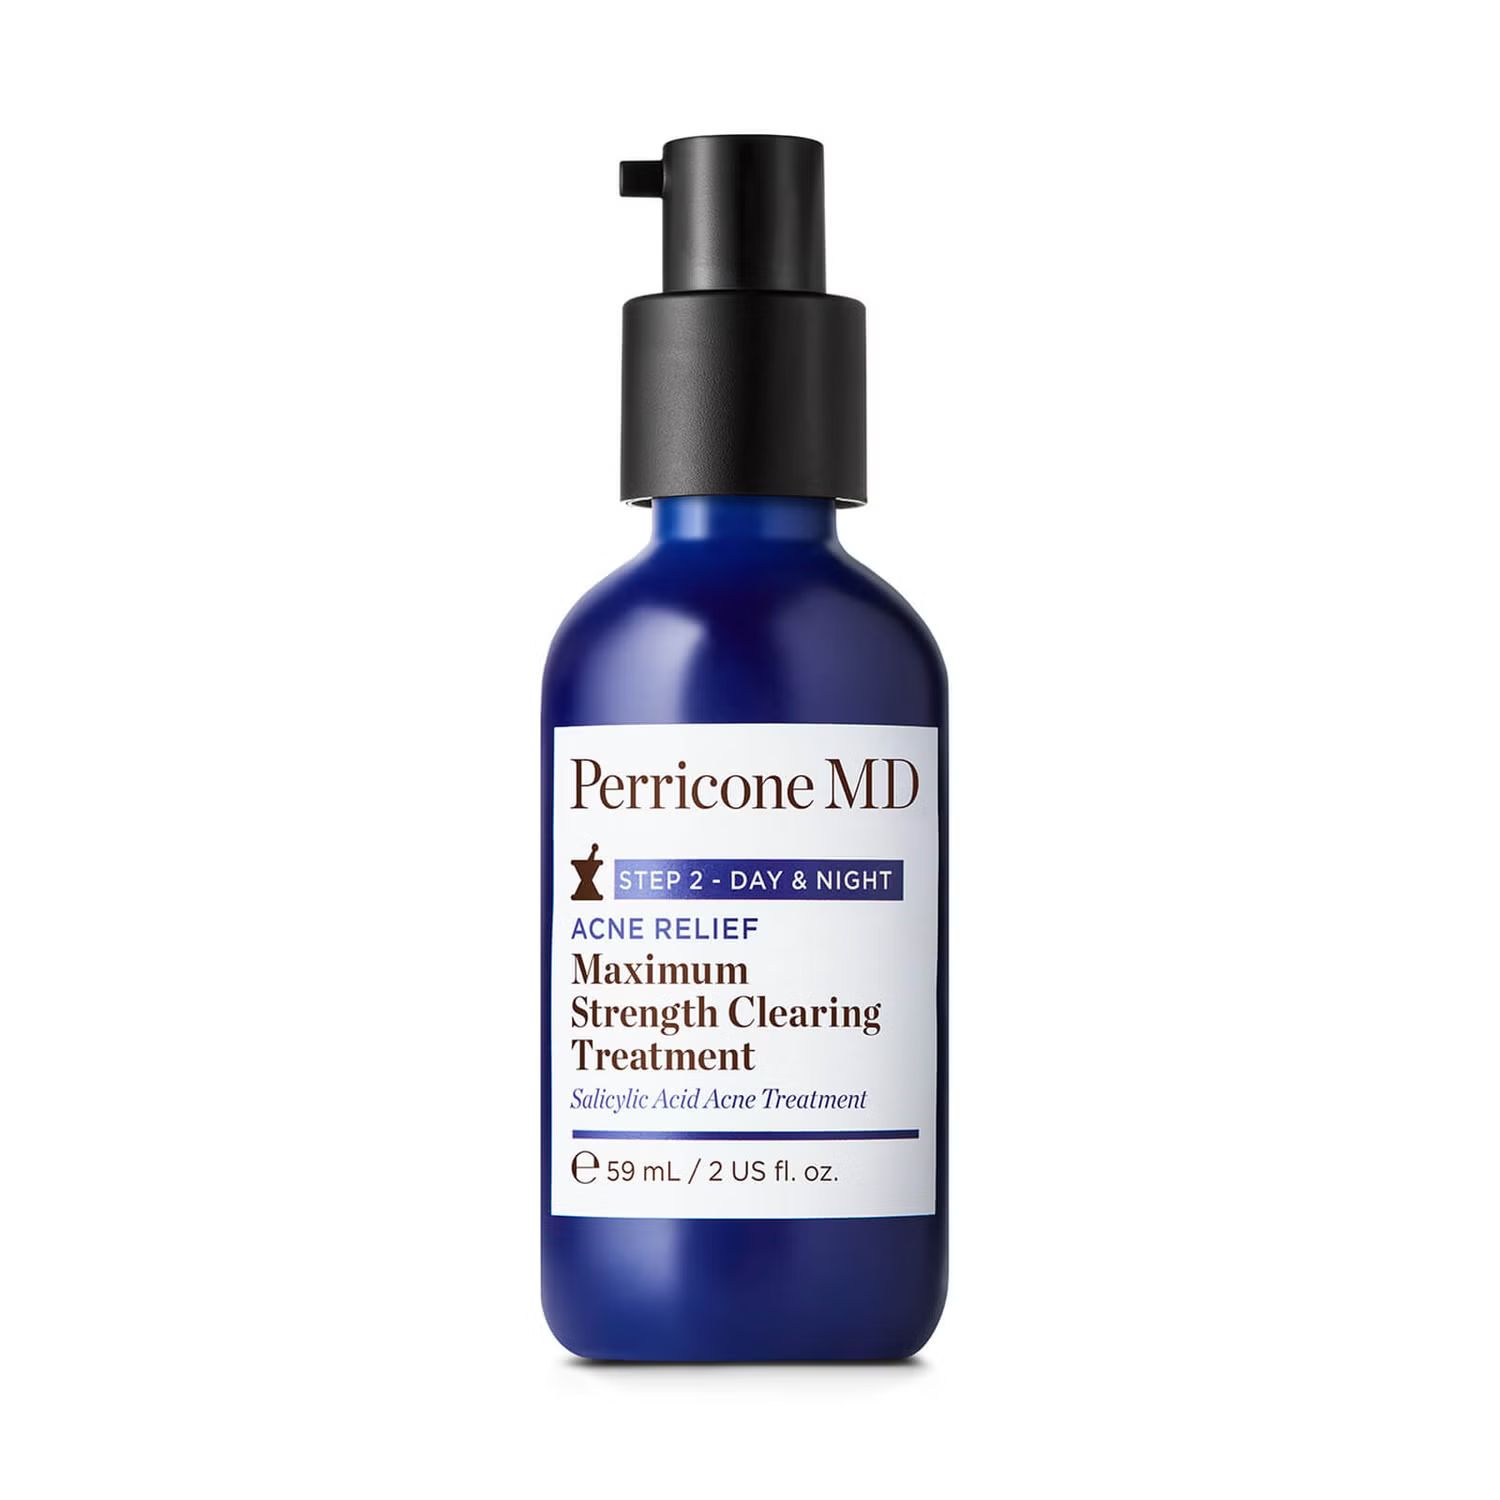 Acne Relief Maximum Strength Clearing Treatment | PerriconeMD US